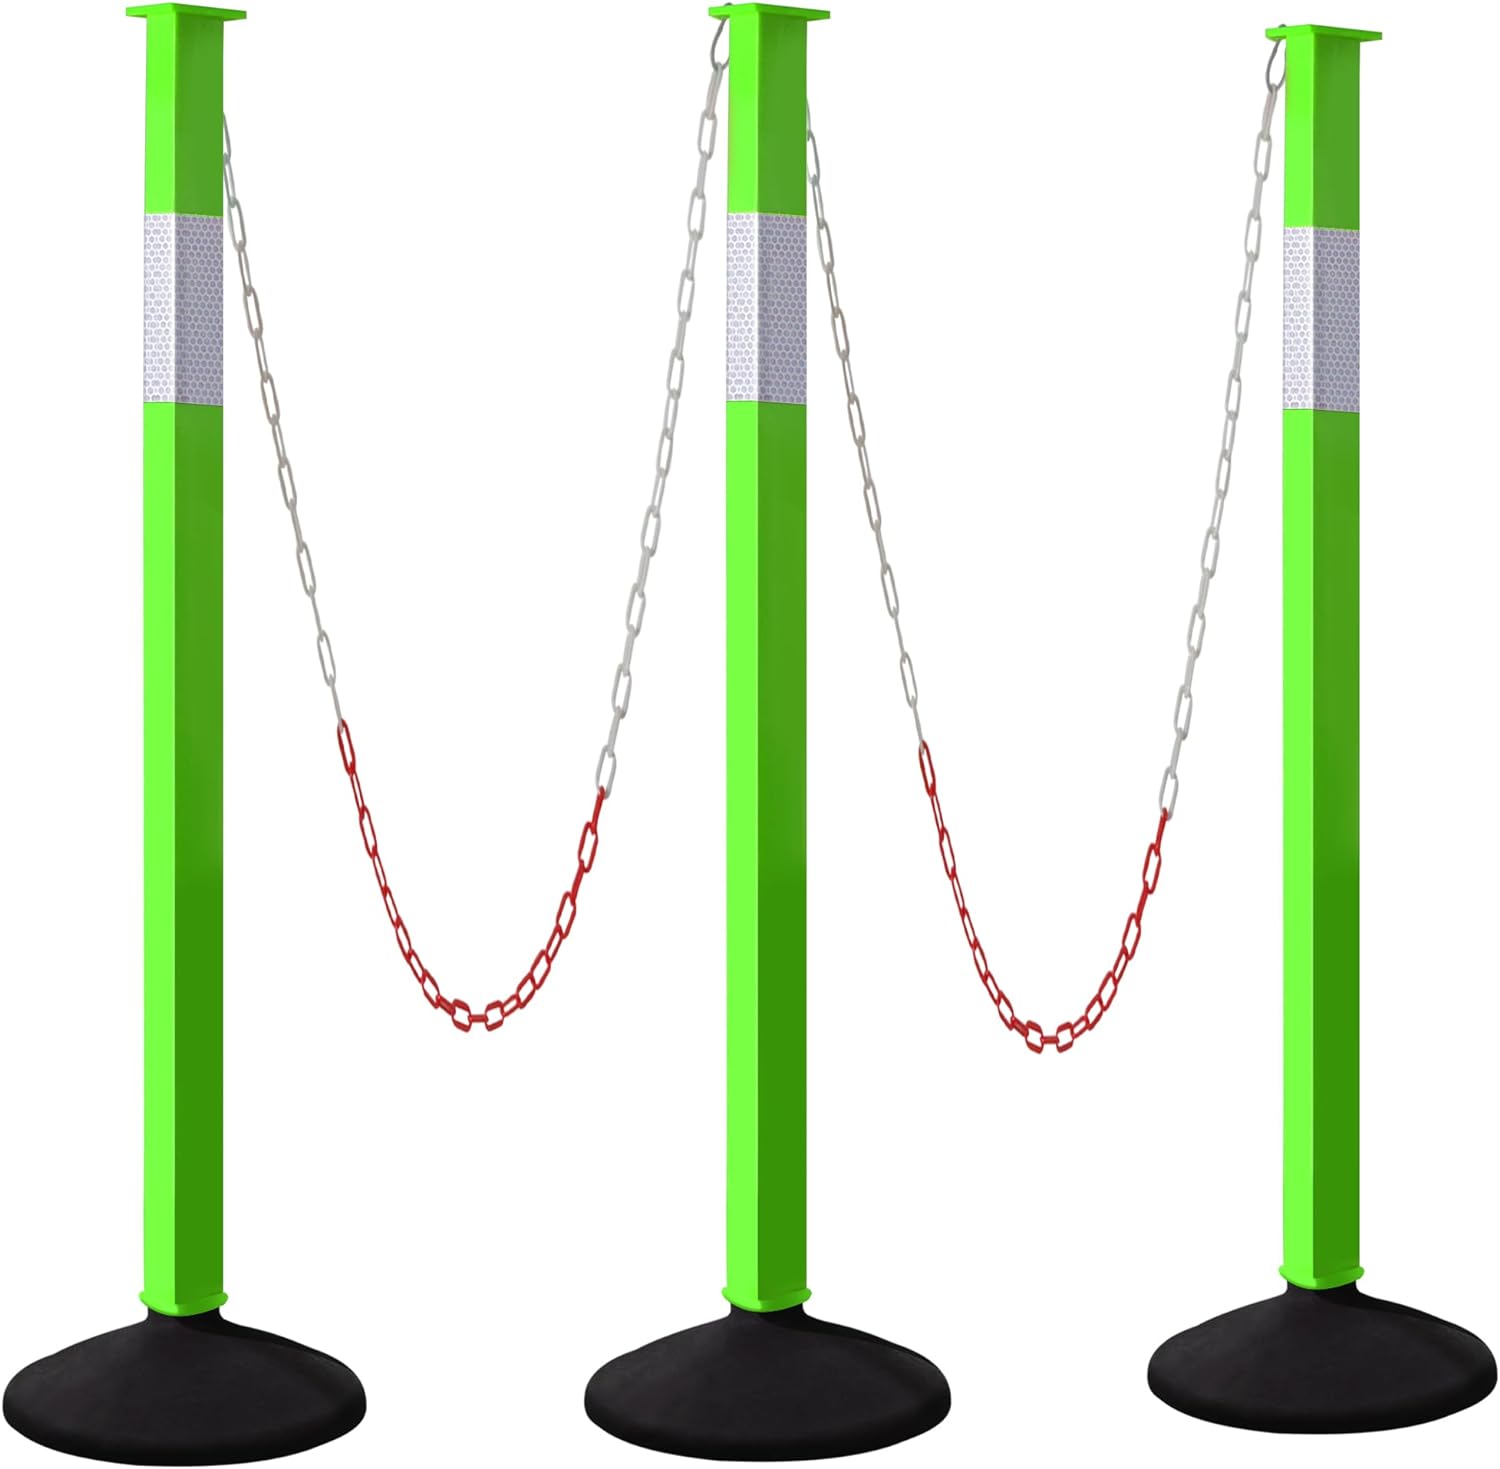 [3 Pack] Adjustable Traffic Delineator Post Cones with Rubber Weighted Base & Reflective Collars, Green Parking Safety Cones with 4 FT Plastic Chains - Driveway & Parking Barrier